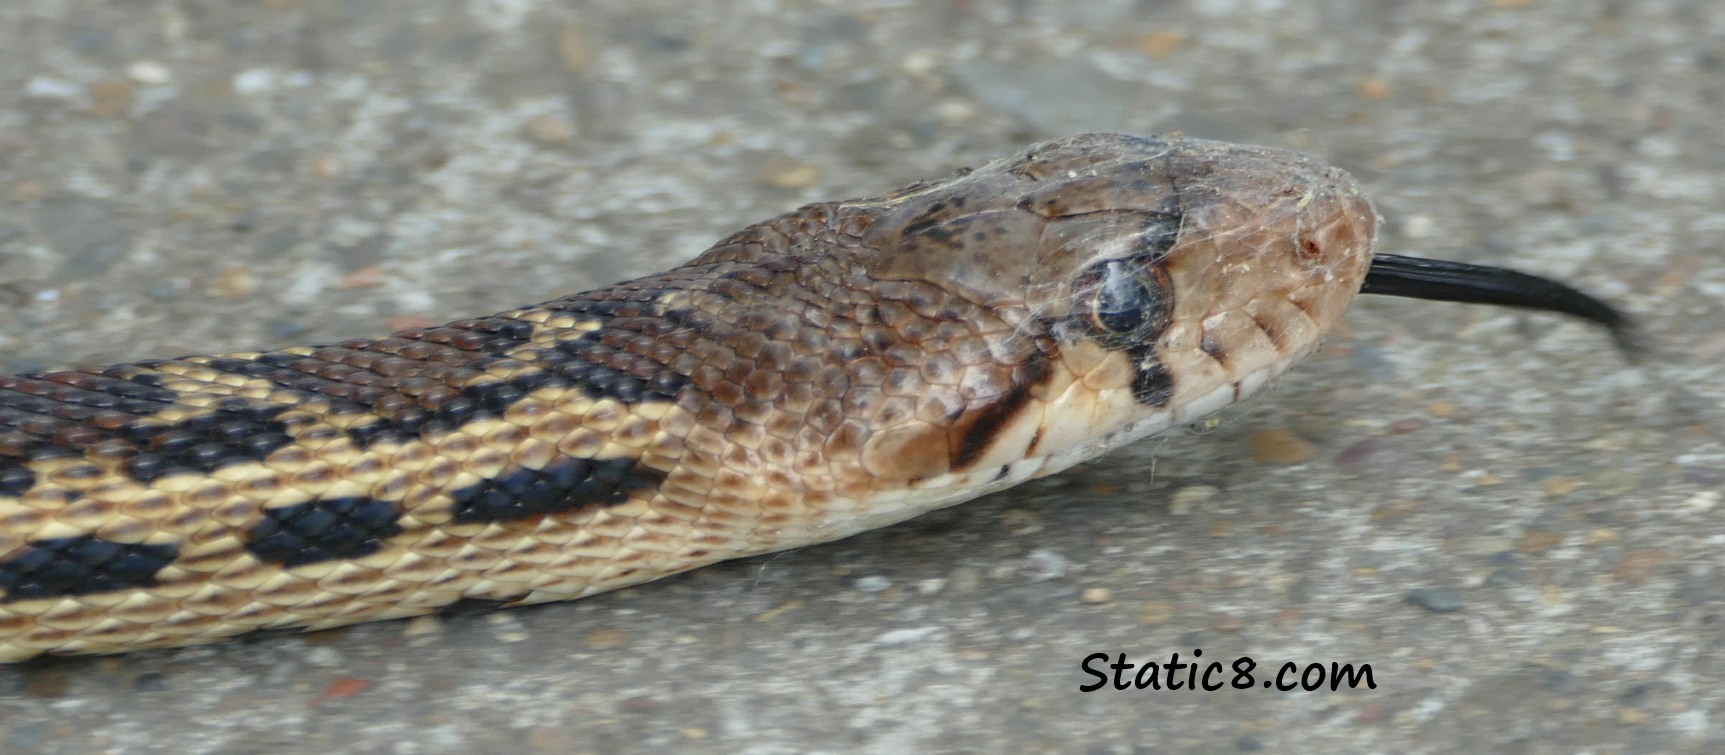 the face of a Gopher Snake, black tongue sticking out!